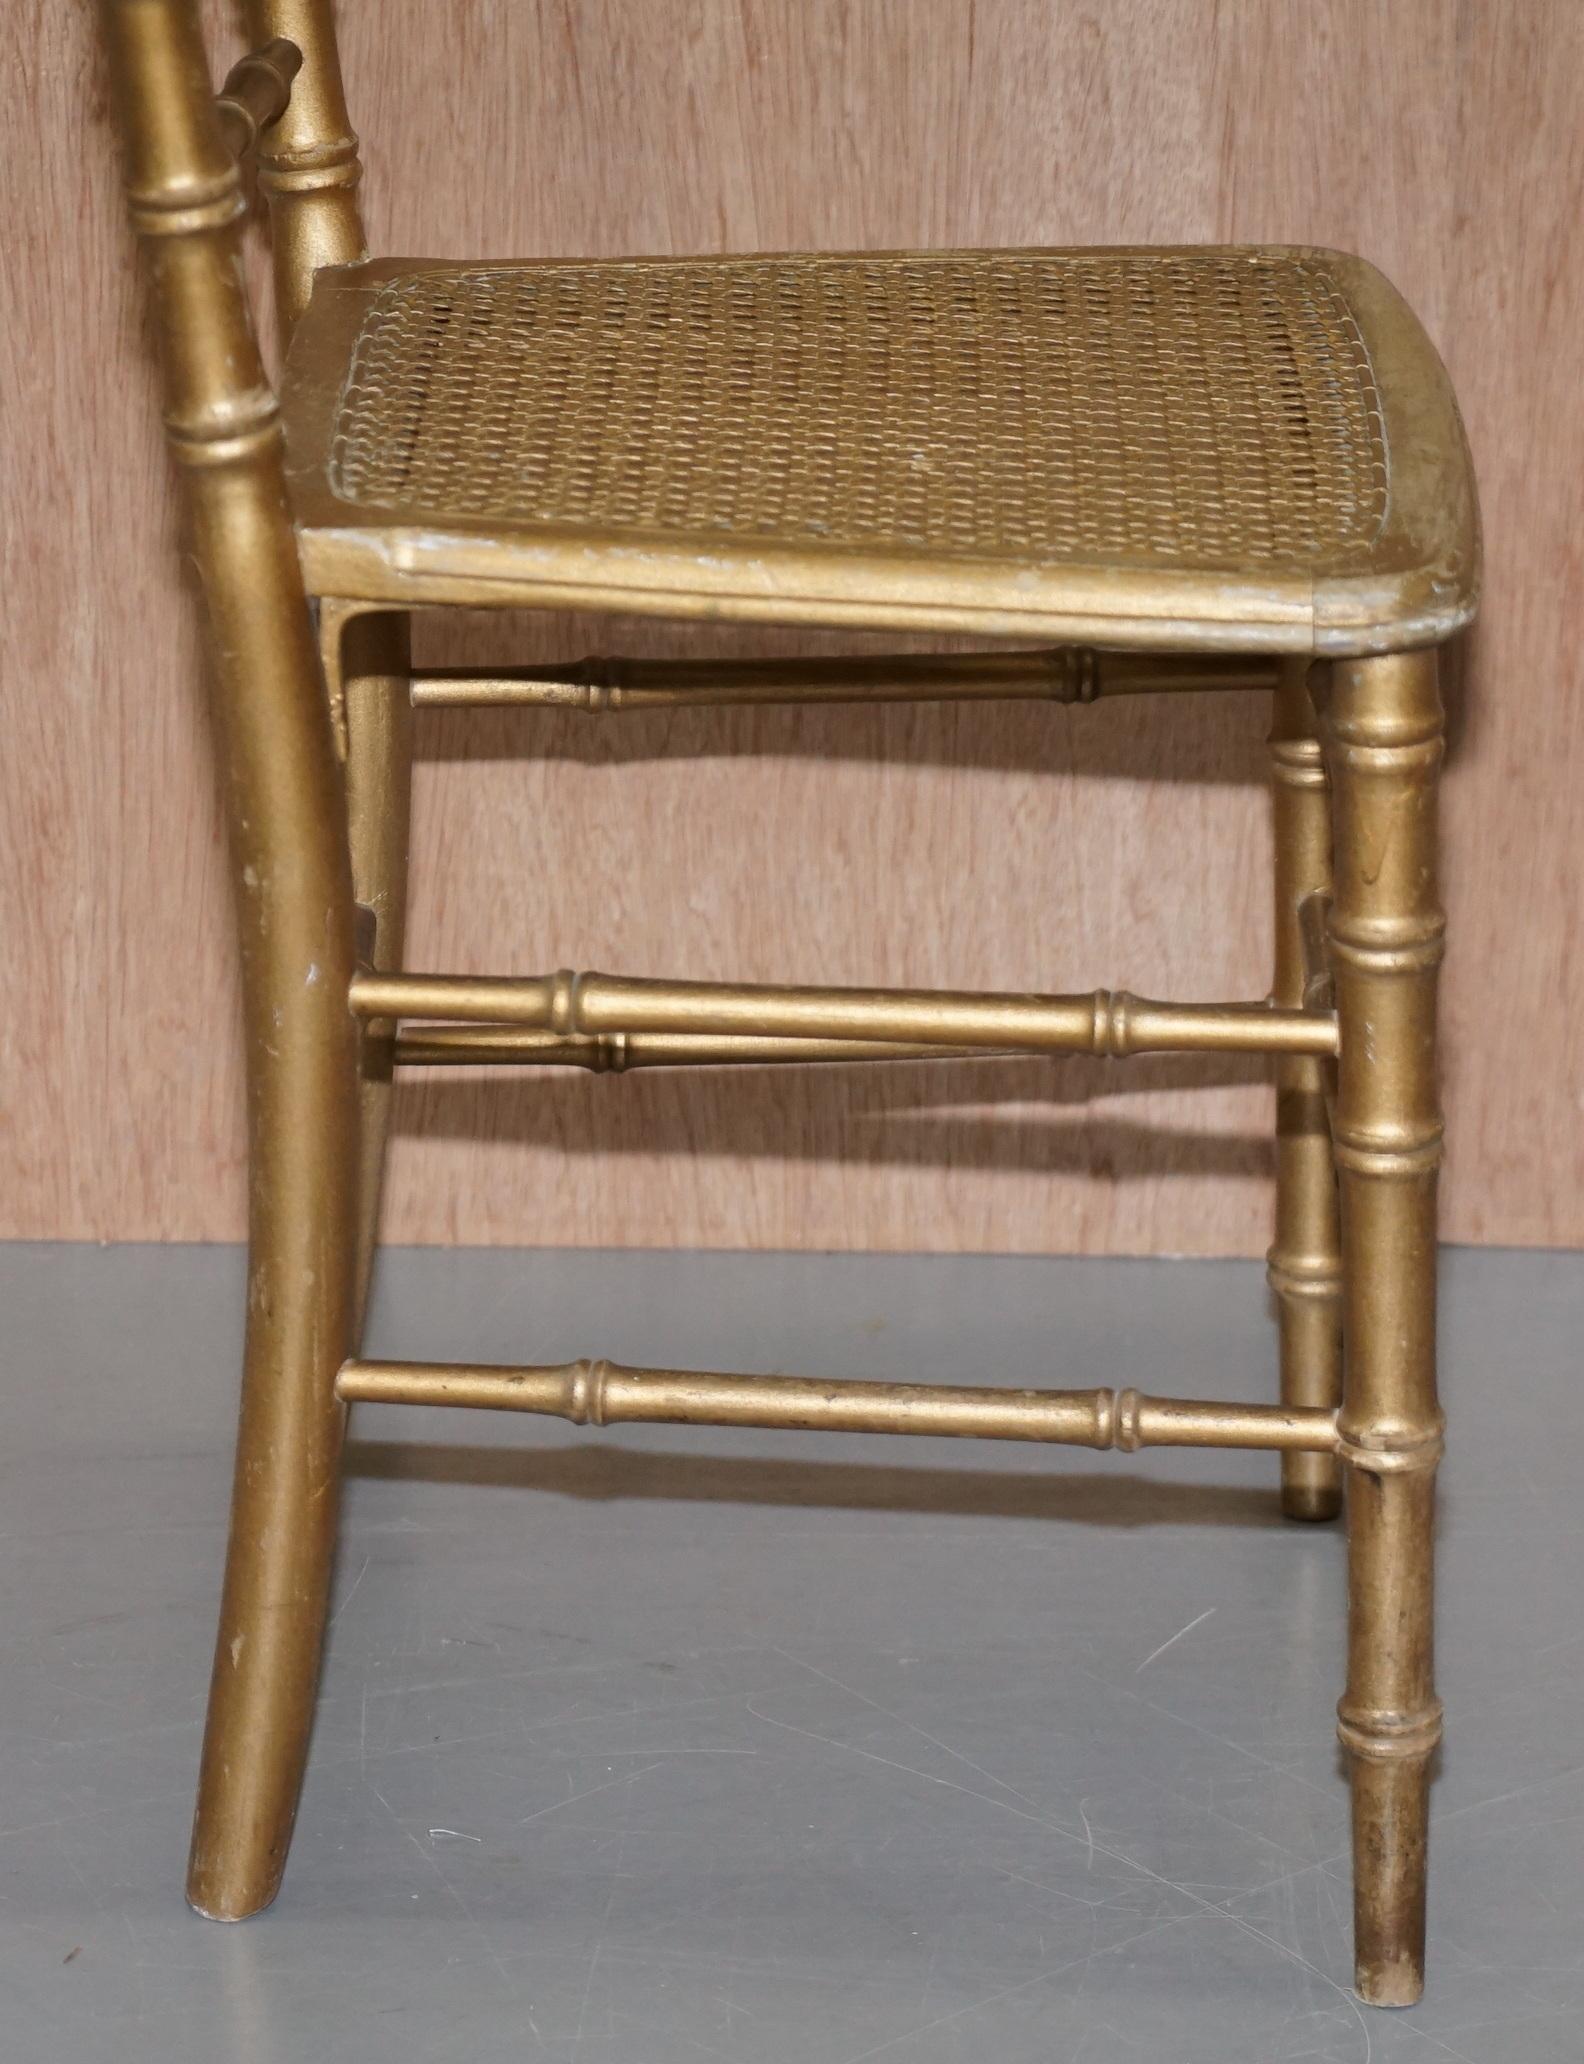 Pair of Edwardian Giltwood Famboo Regency Style Bergere Chairs with Gold Gilding For Sale 4